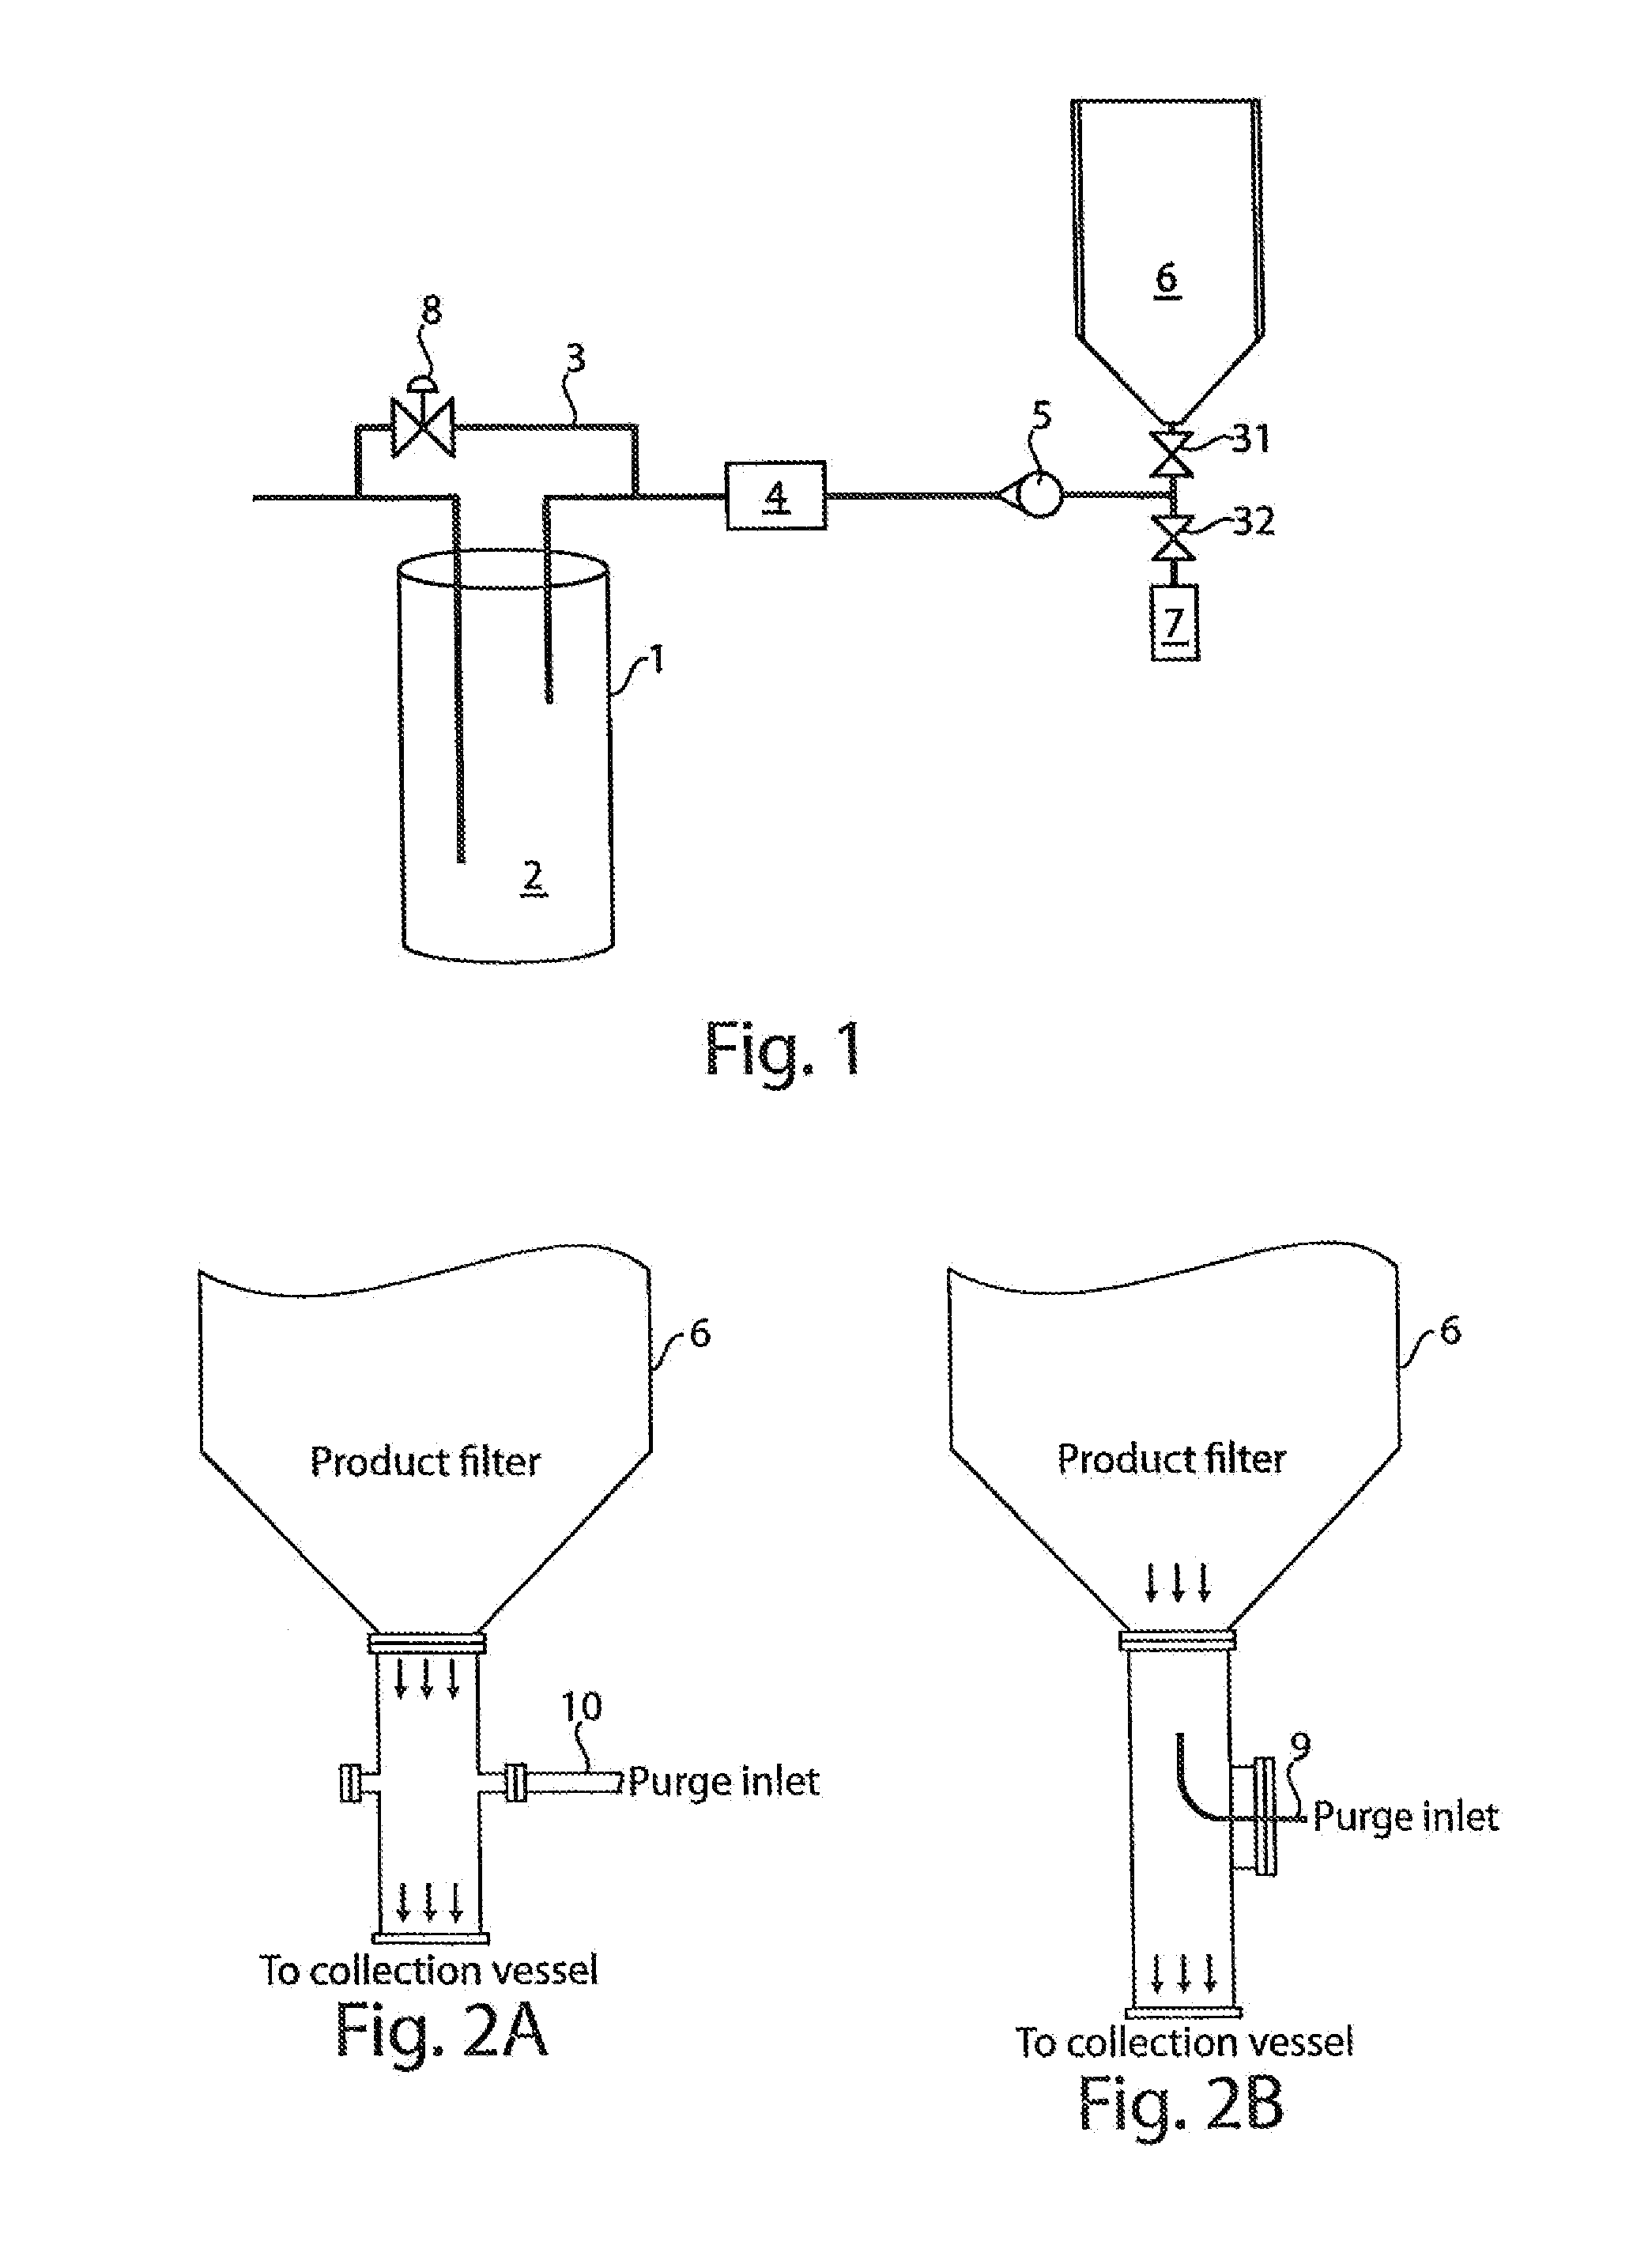 Dosator Apparatus for Filling a Capsule with Dry Powder